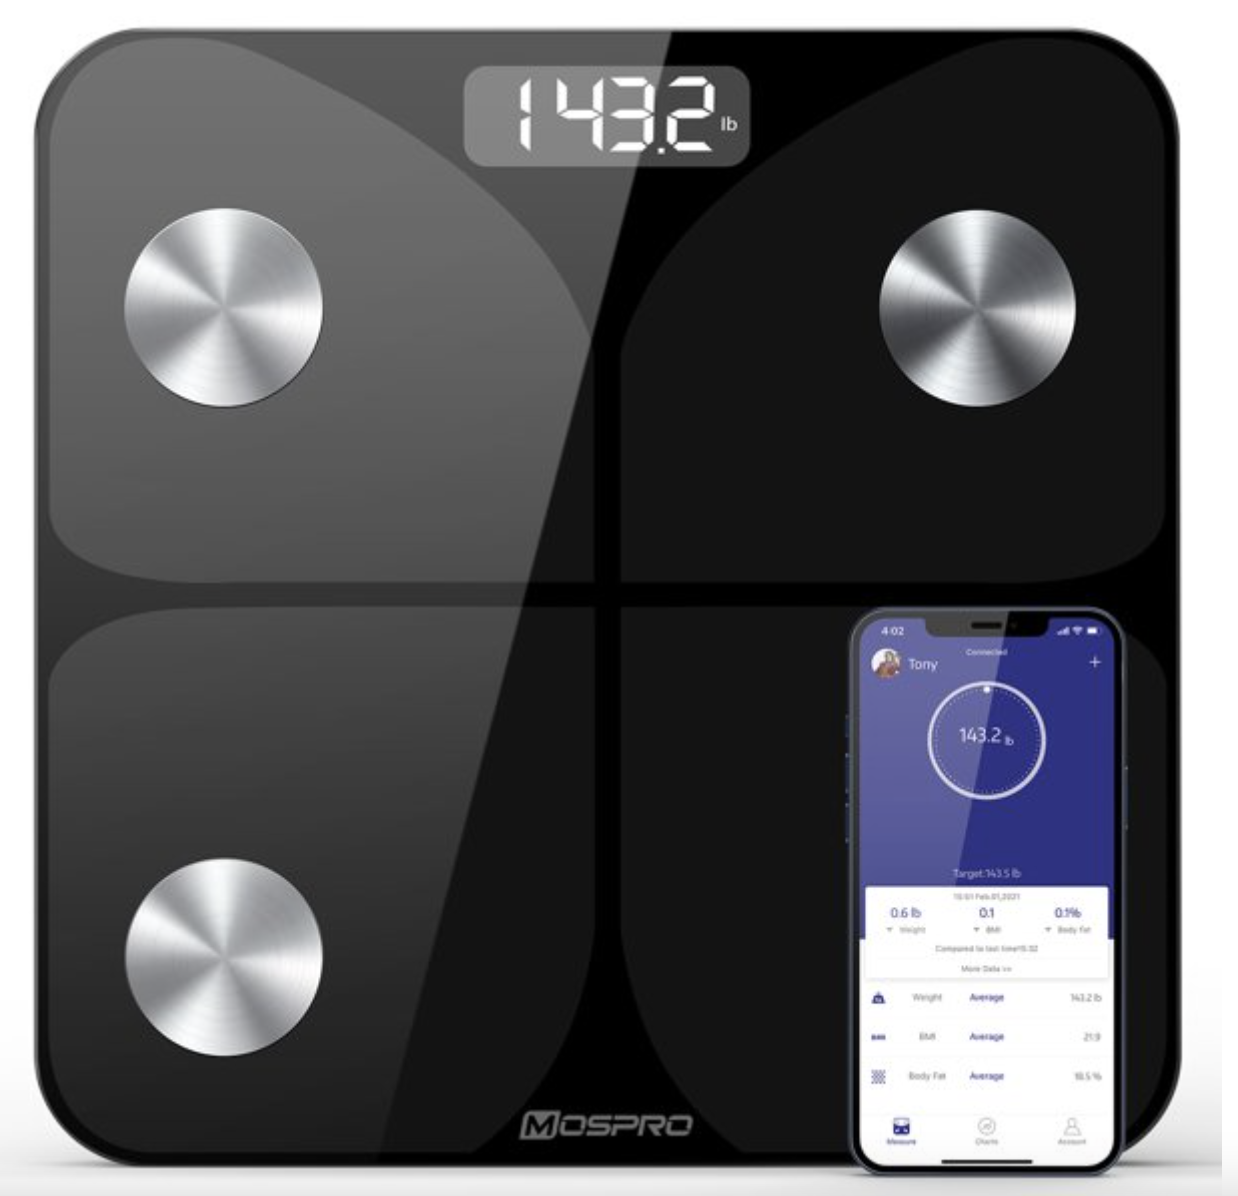 MOSPRO Smart Body Fat Weight Scale